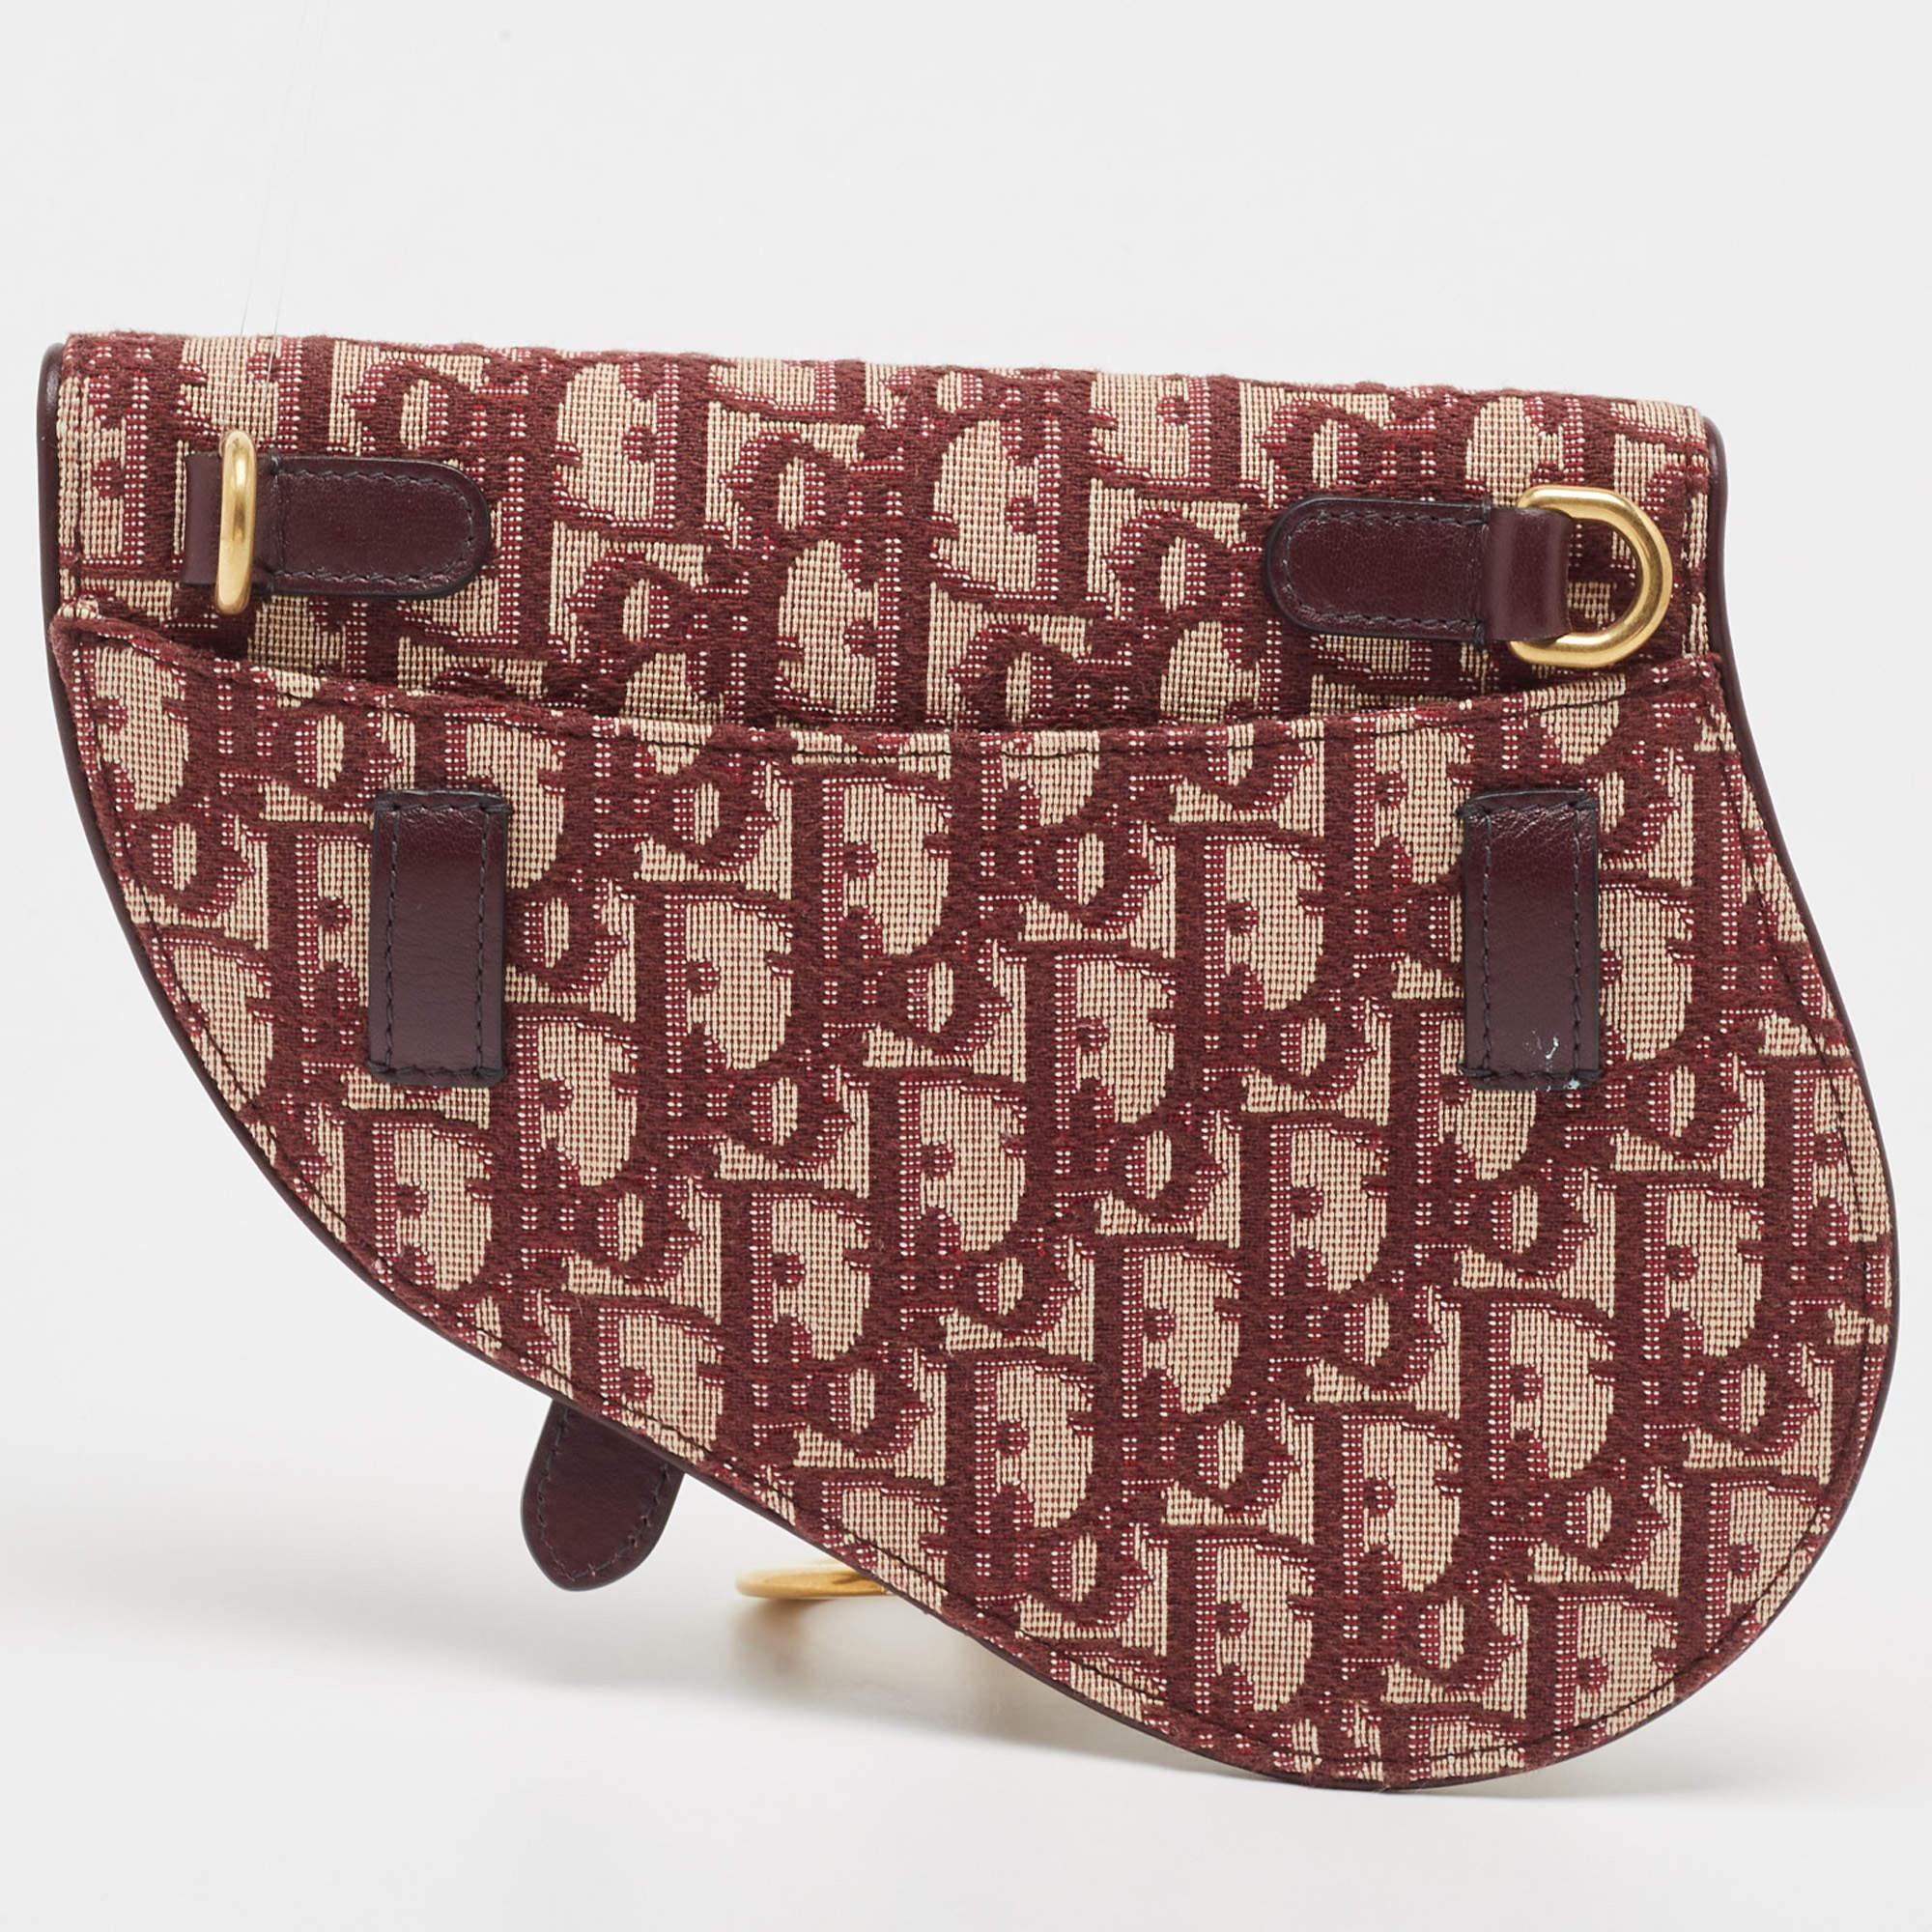 Designed to be carried around the waist, this Saddle belt bag by Dior speaks of all things being fashionable. It is made from Oblique canvas and designed in the likeness of the brand's famous Saddle bag.

Includes: Info Card